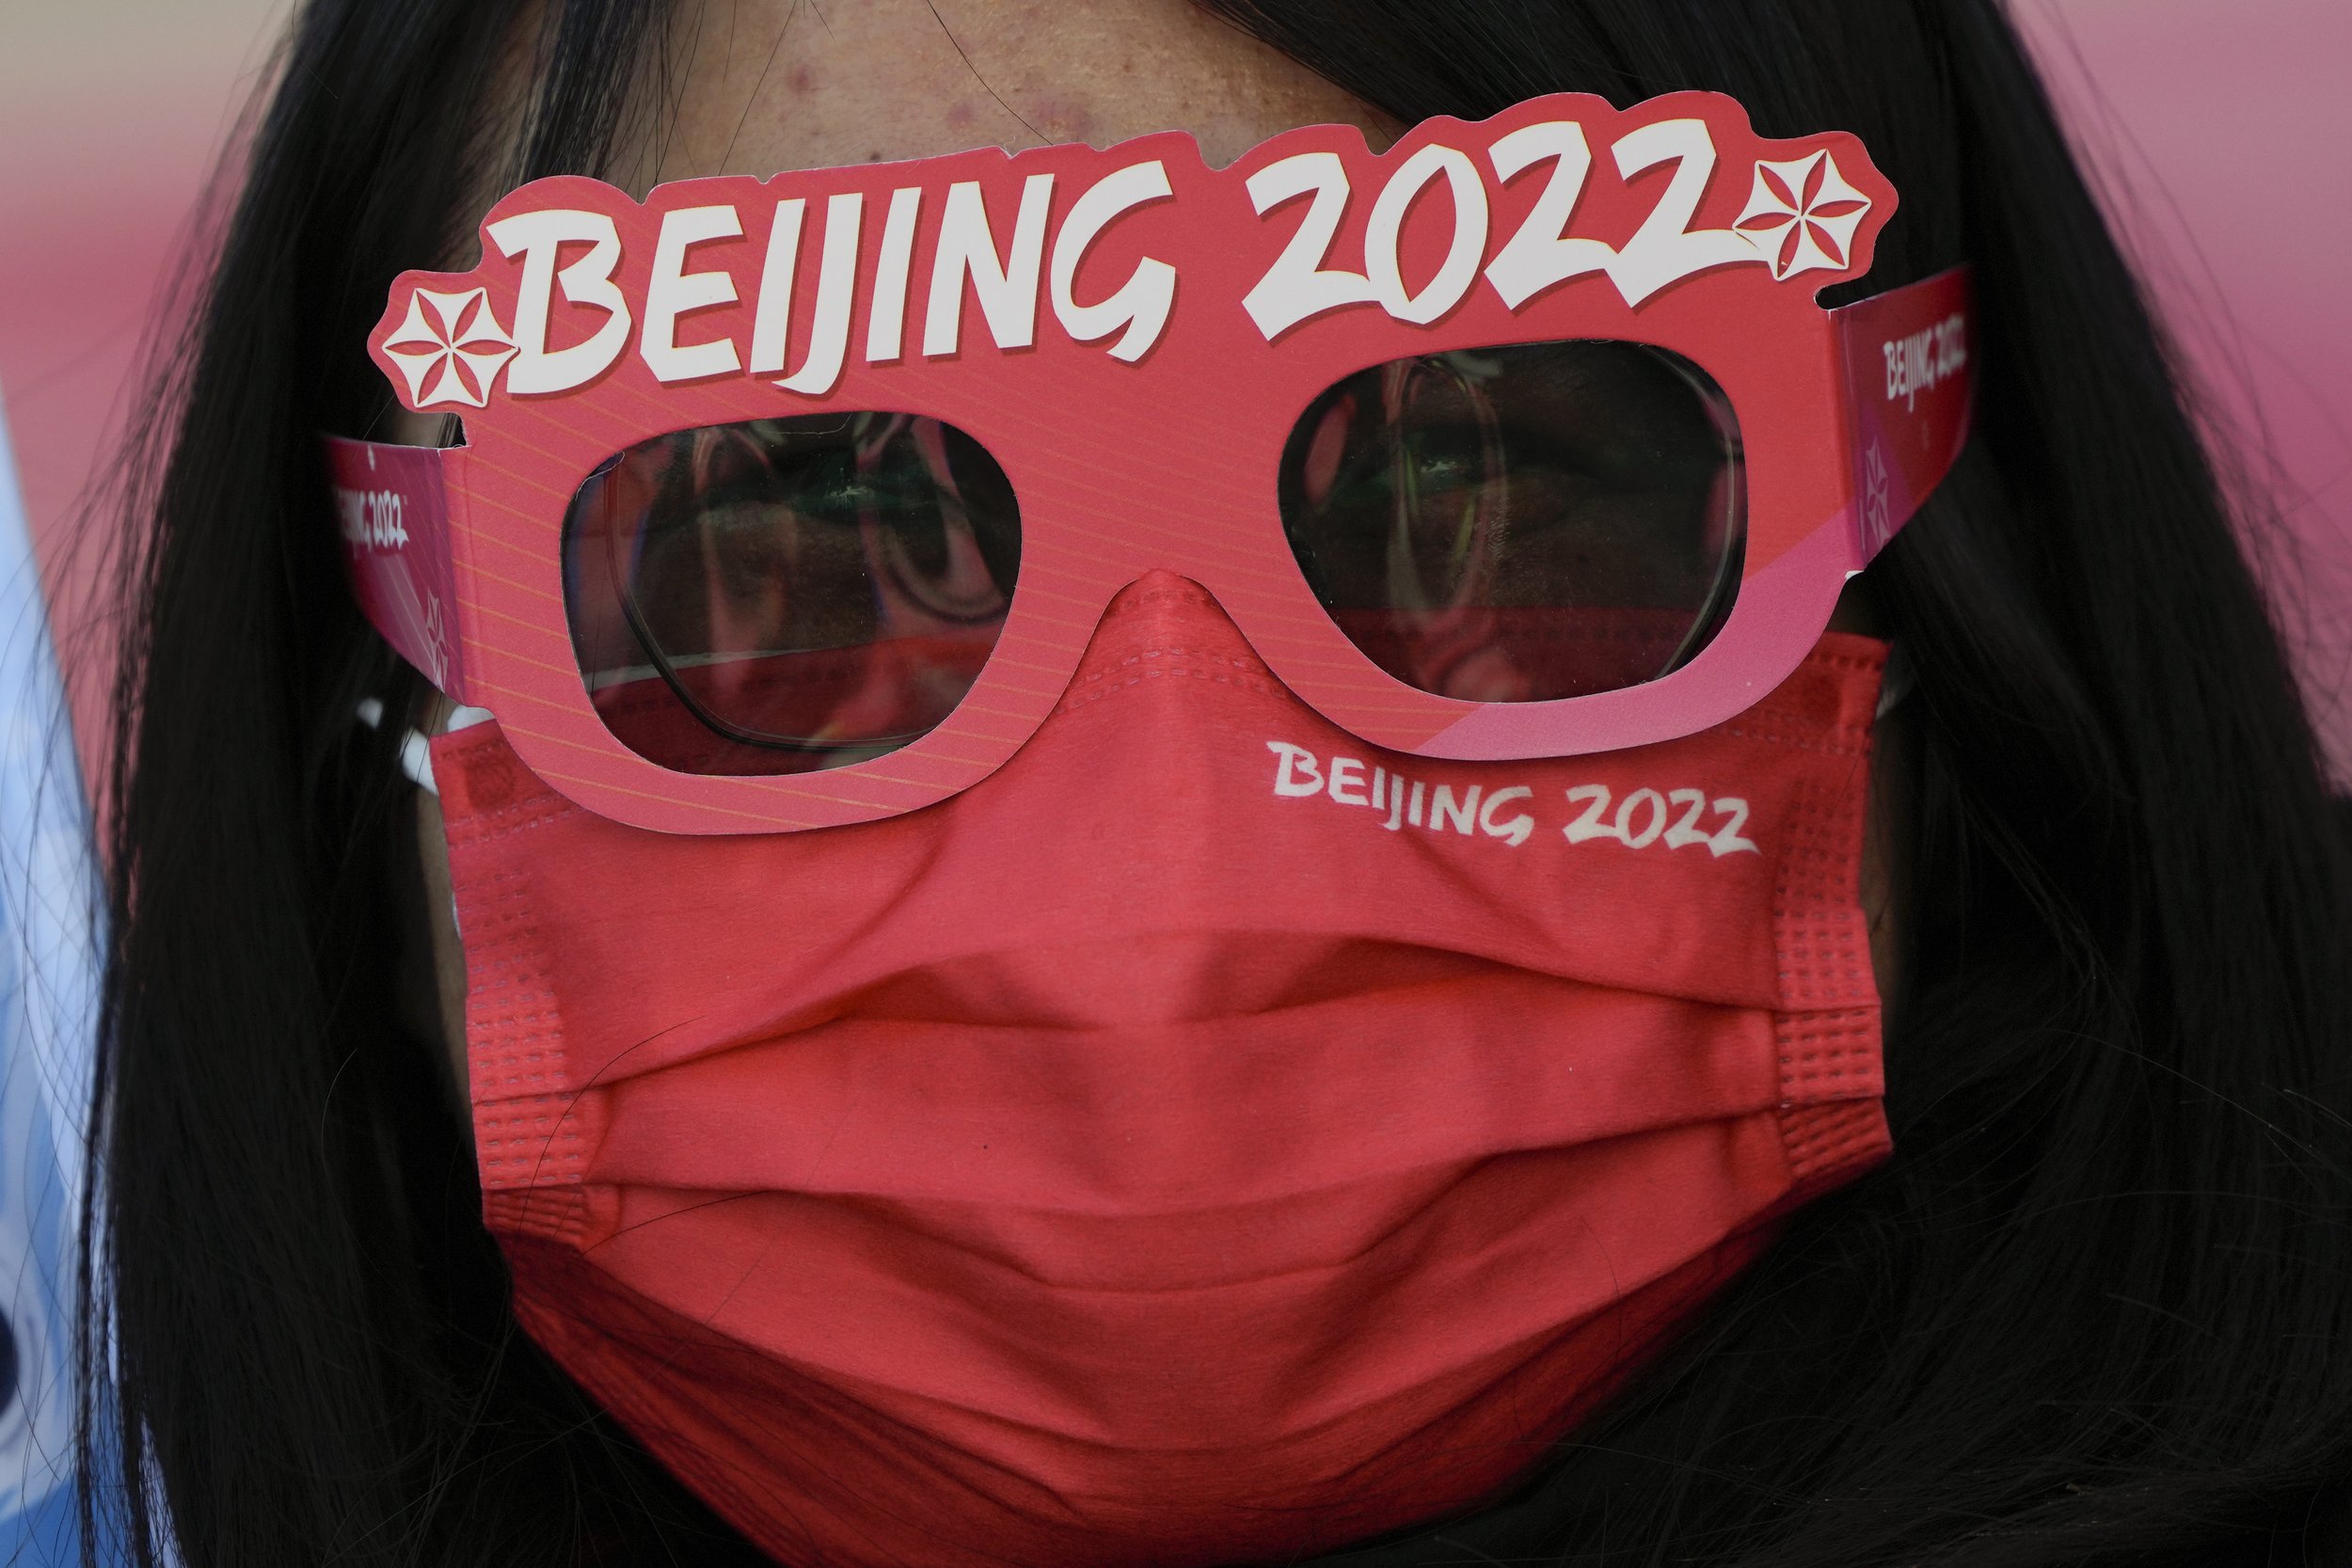  A spectator waits for the start of the men's downhill at the 2022 Winter Olympics, Monday, Feb. 7, 2022, in the Yanqing district of Beijing.(AP Photo/Mark Schiefelbein) 